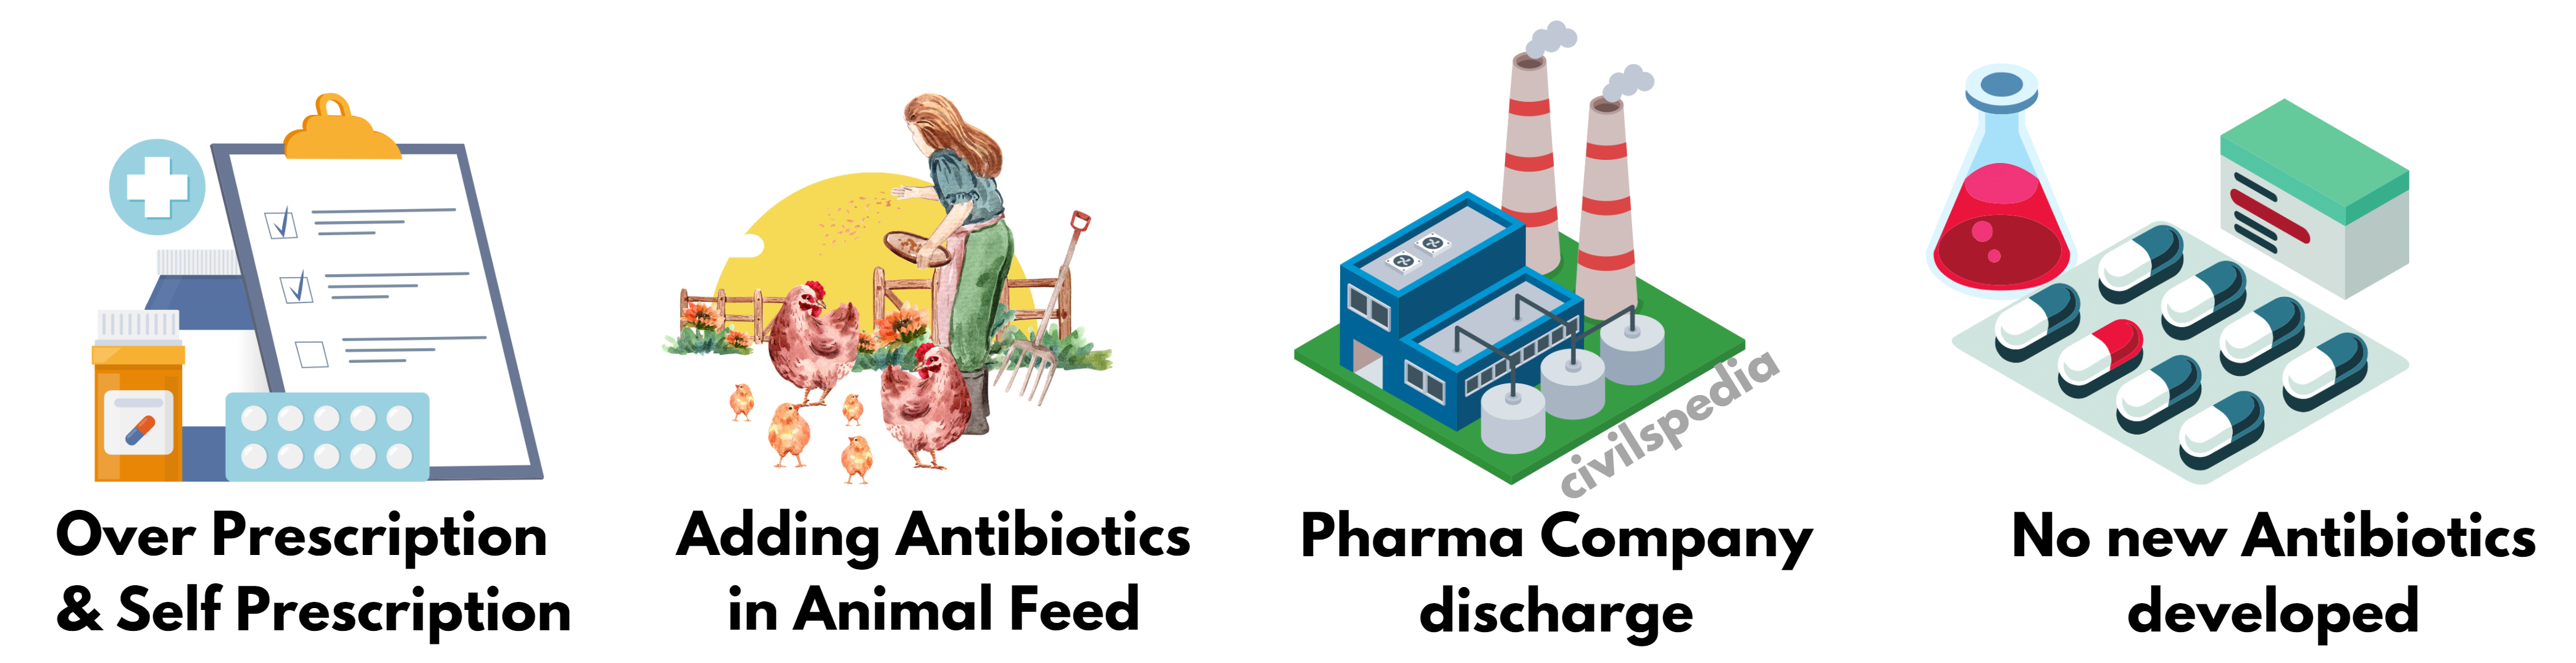 Causes of Anti-Microbial Resistance